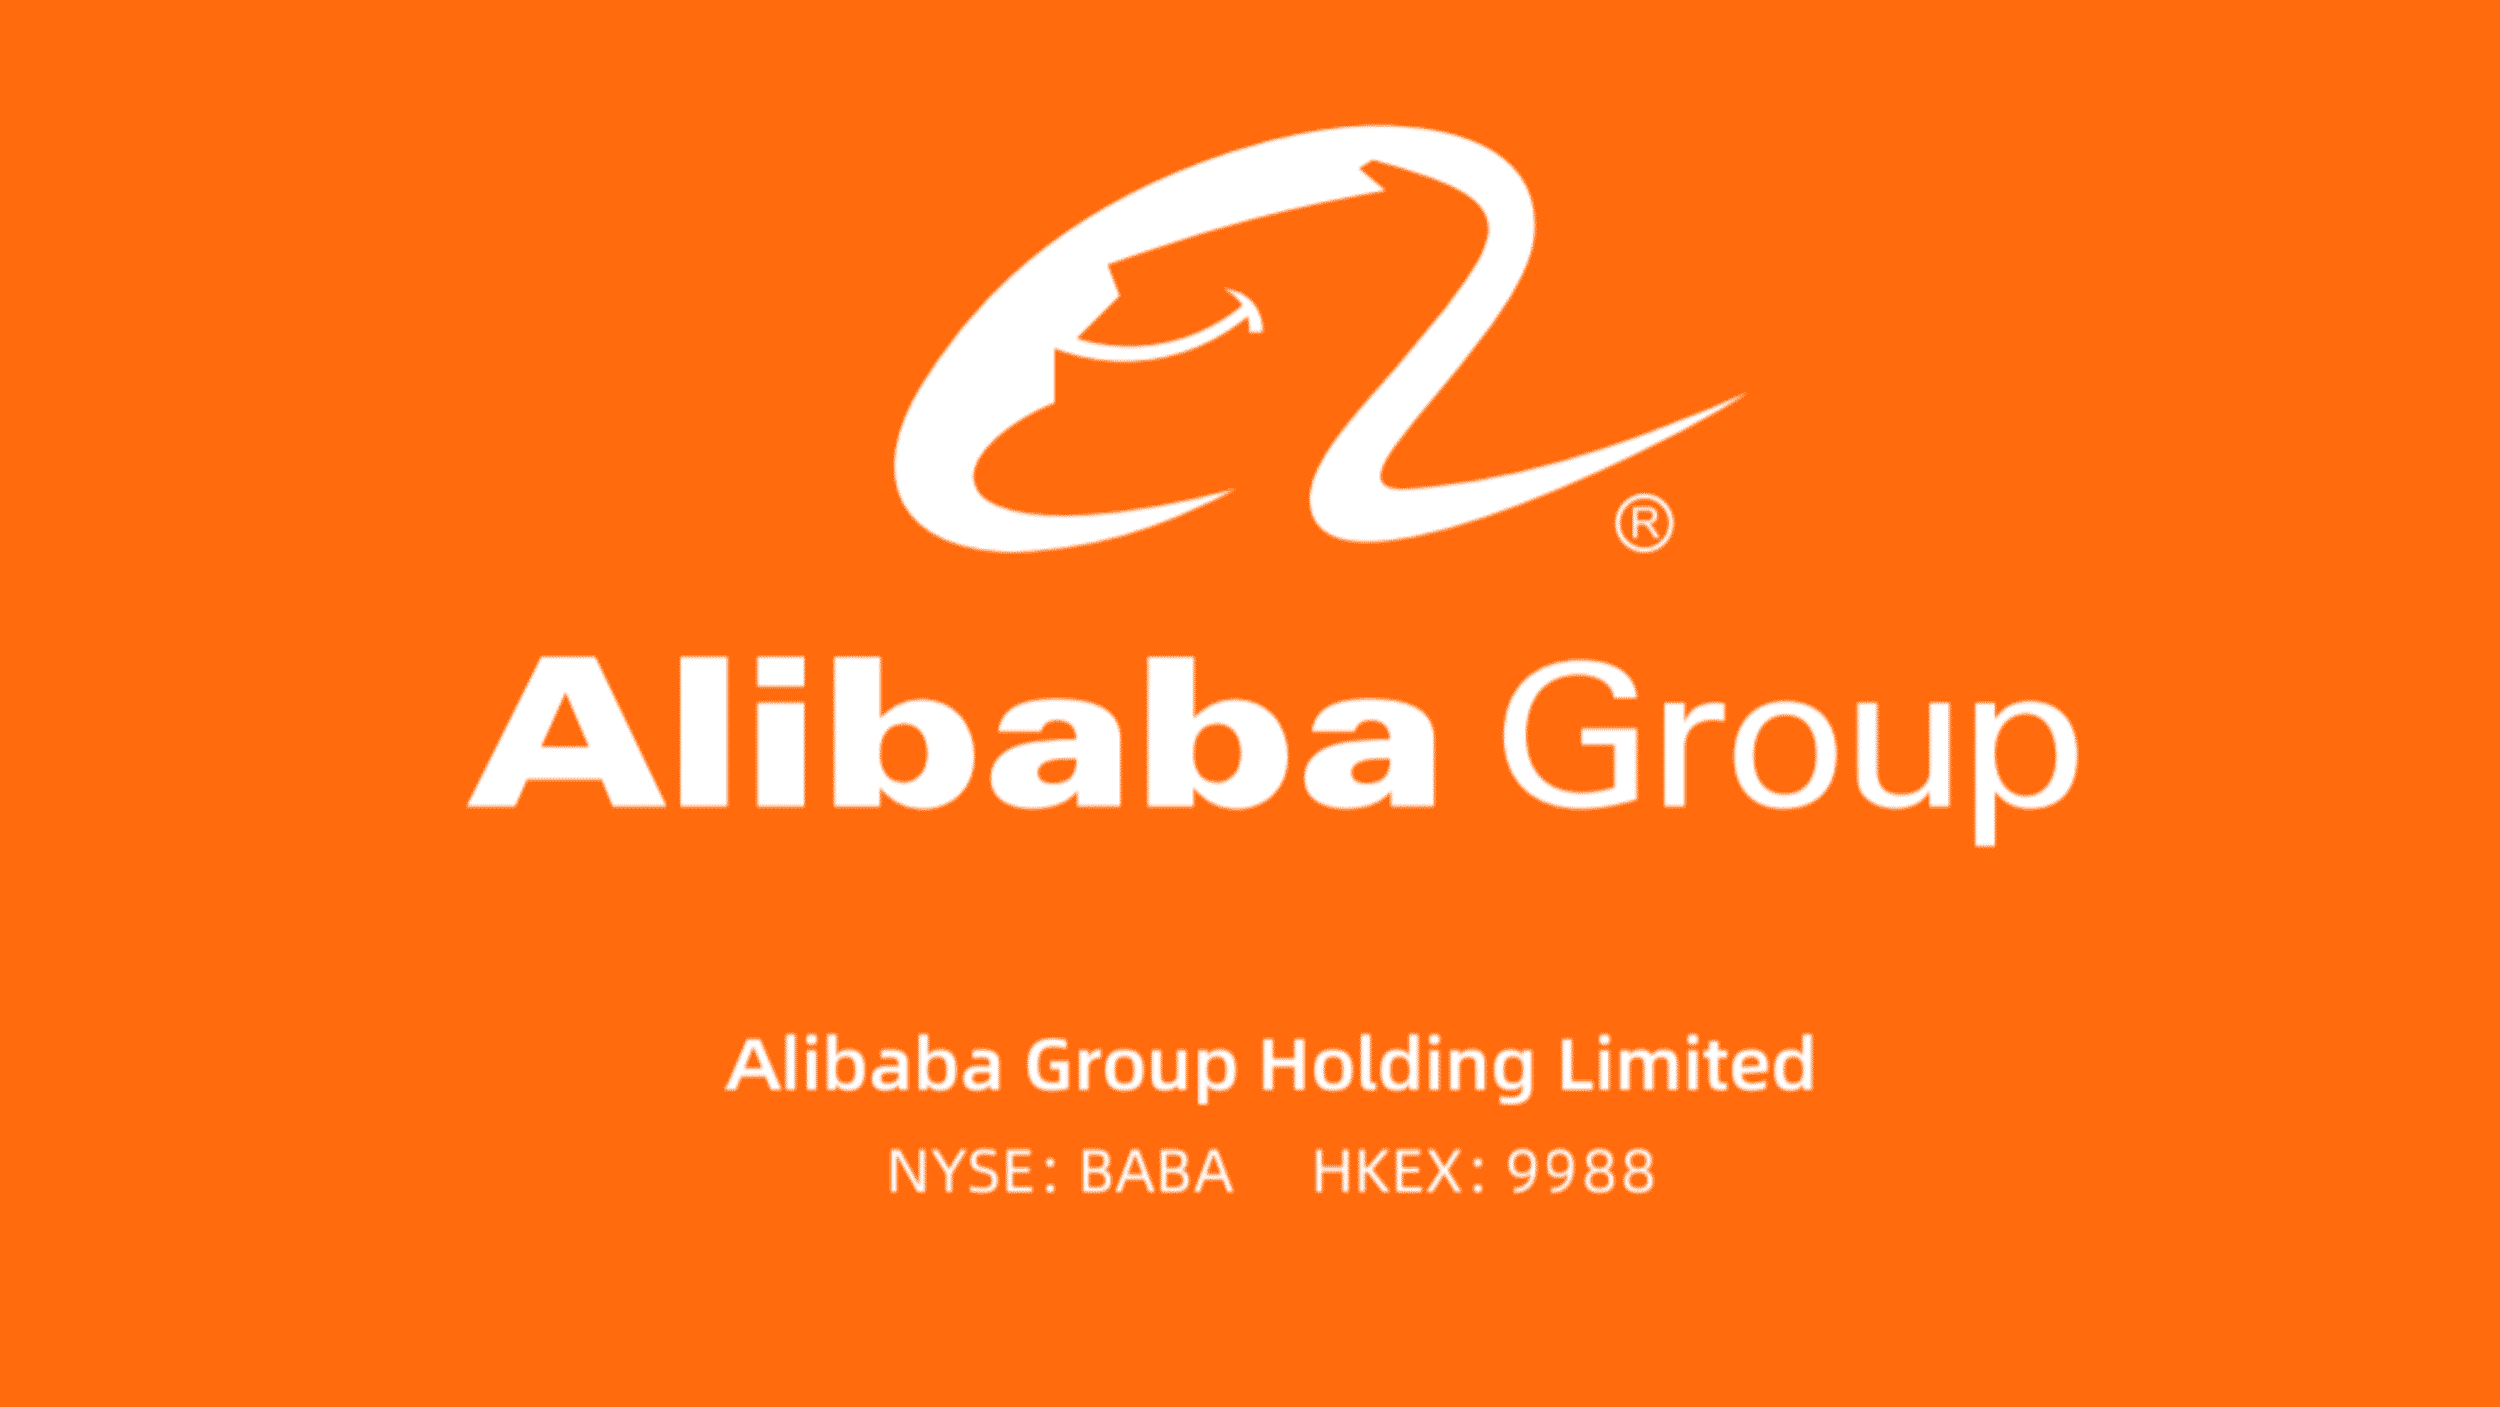 Alibaba slapped with $2.8 billion fine for violating anti-monopoly regulations